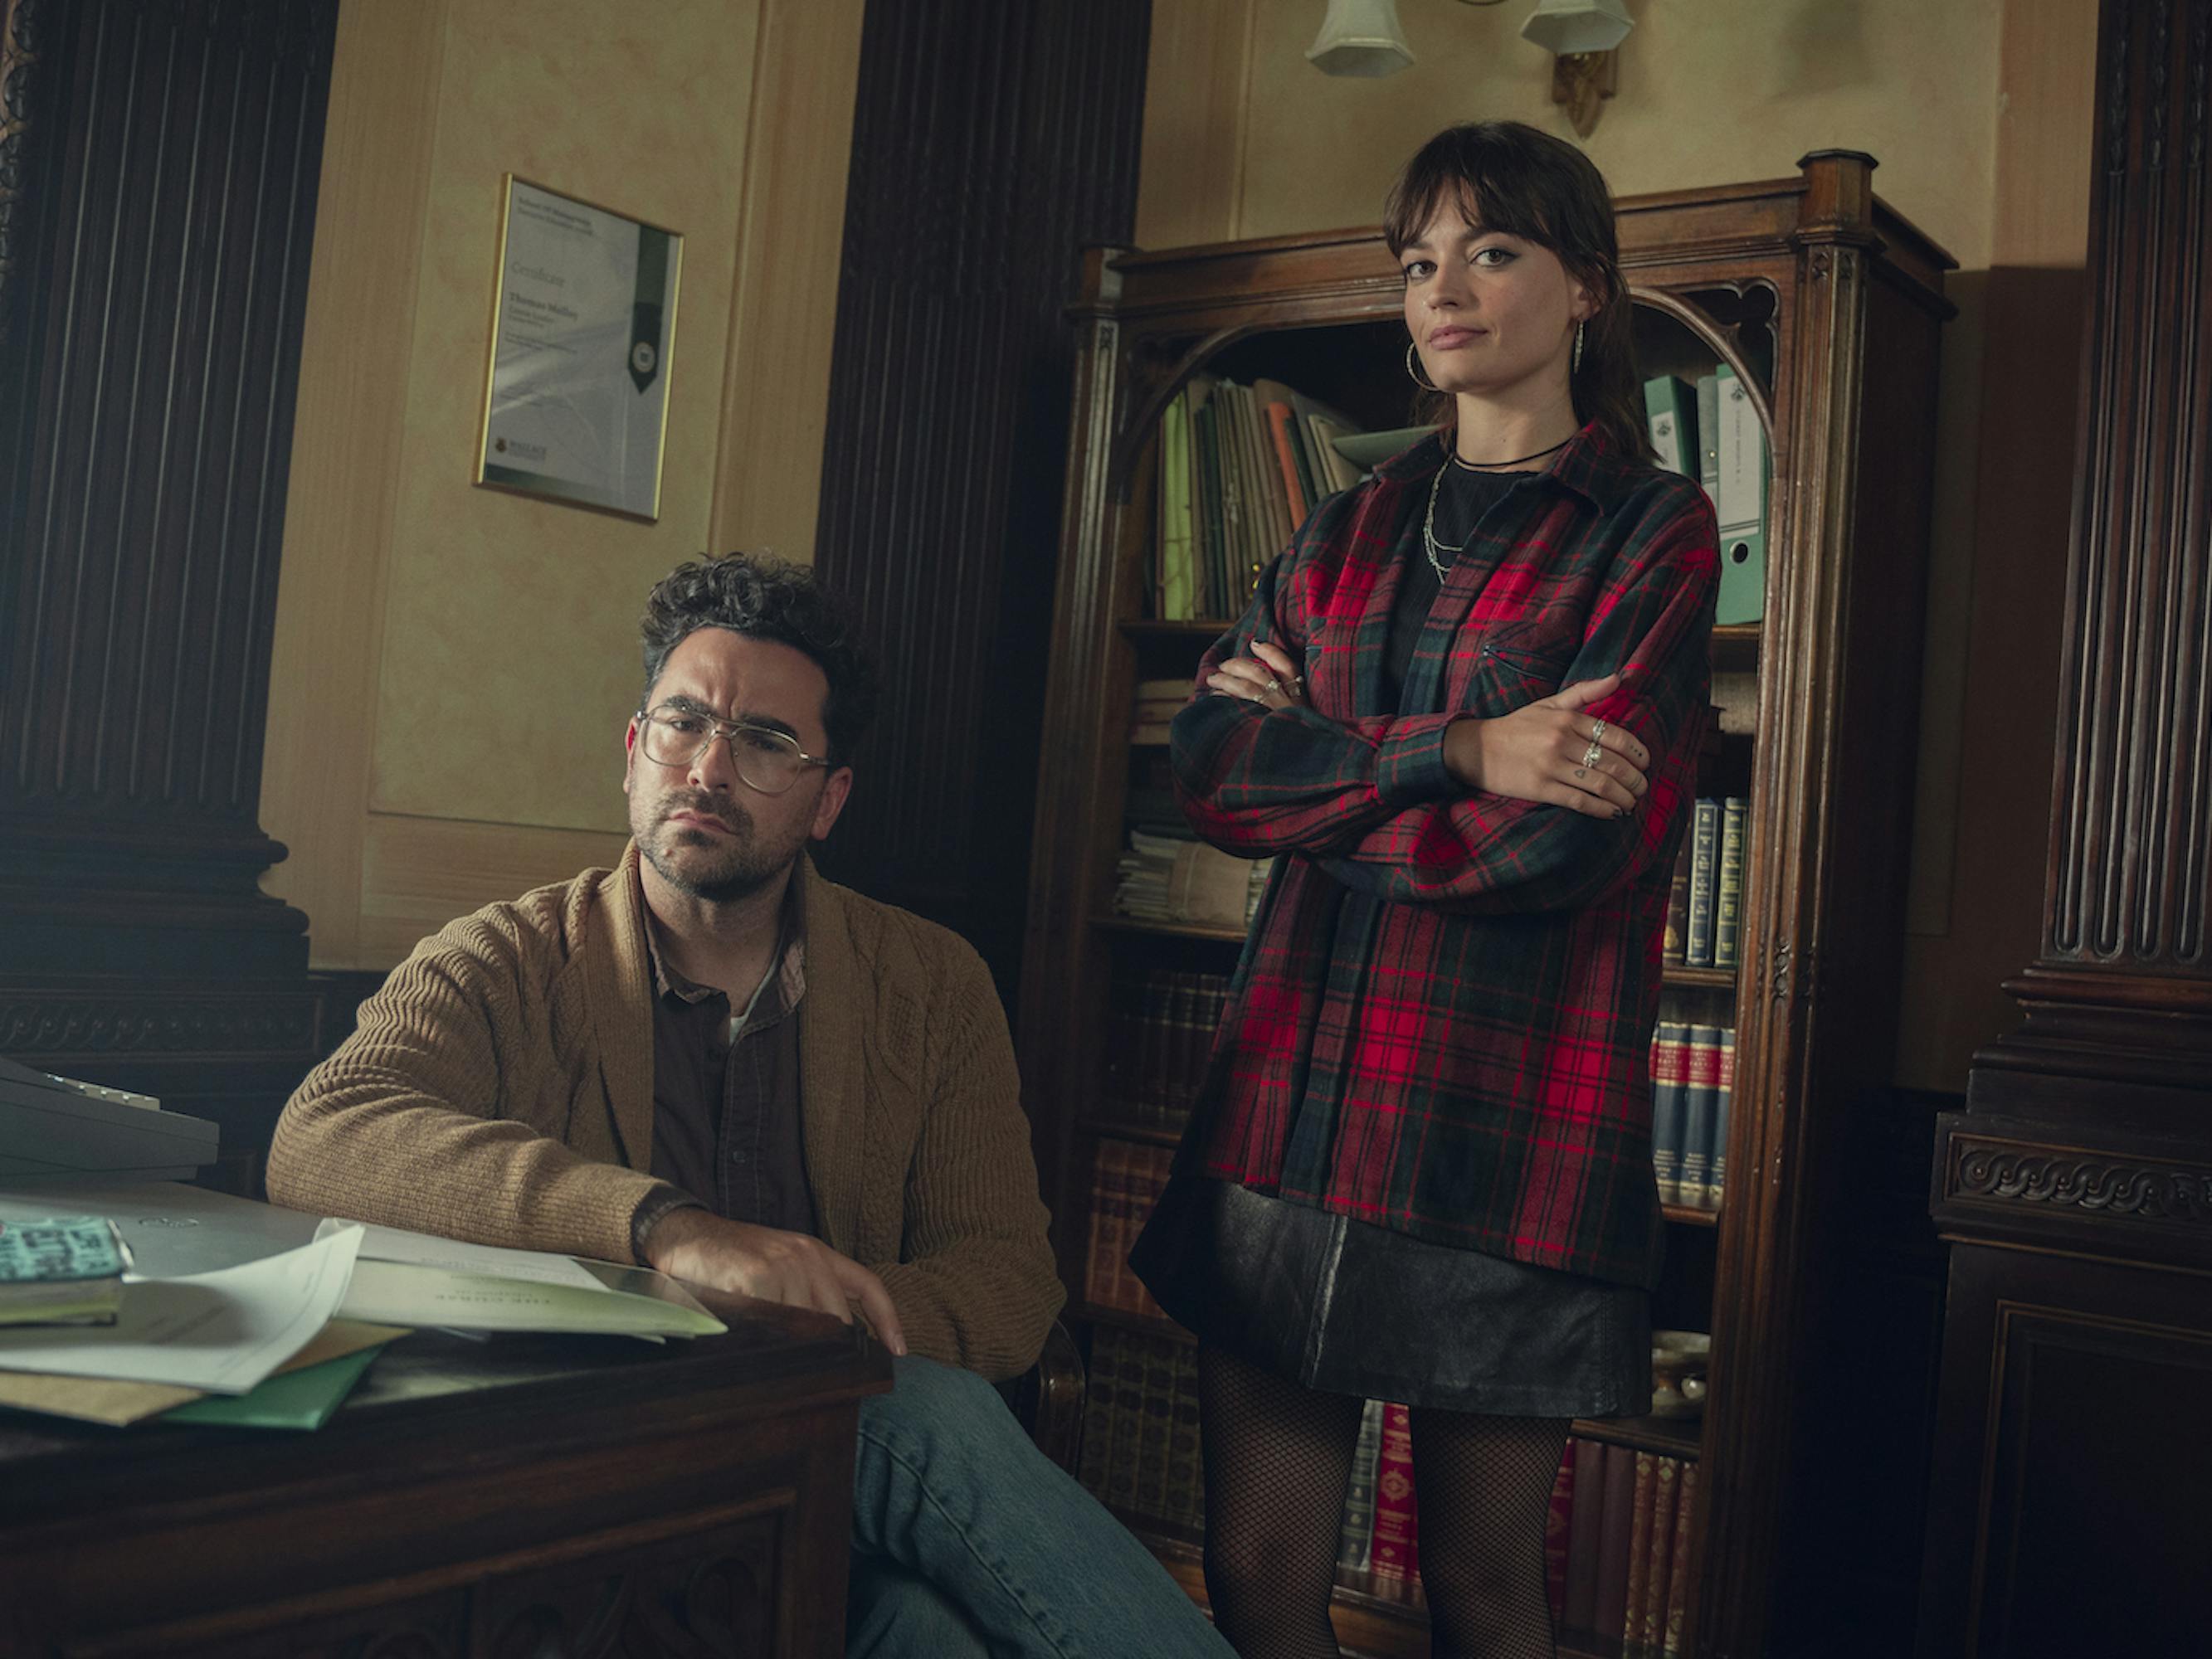 Thomas Molloy (Dan Levy) and Maeve Wiley (Emma Mackey) stand together in a wood paneled office with an American flag.